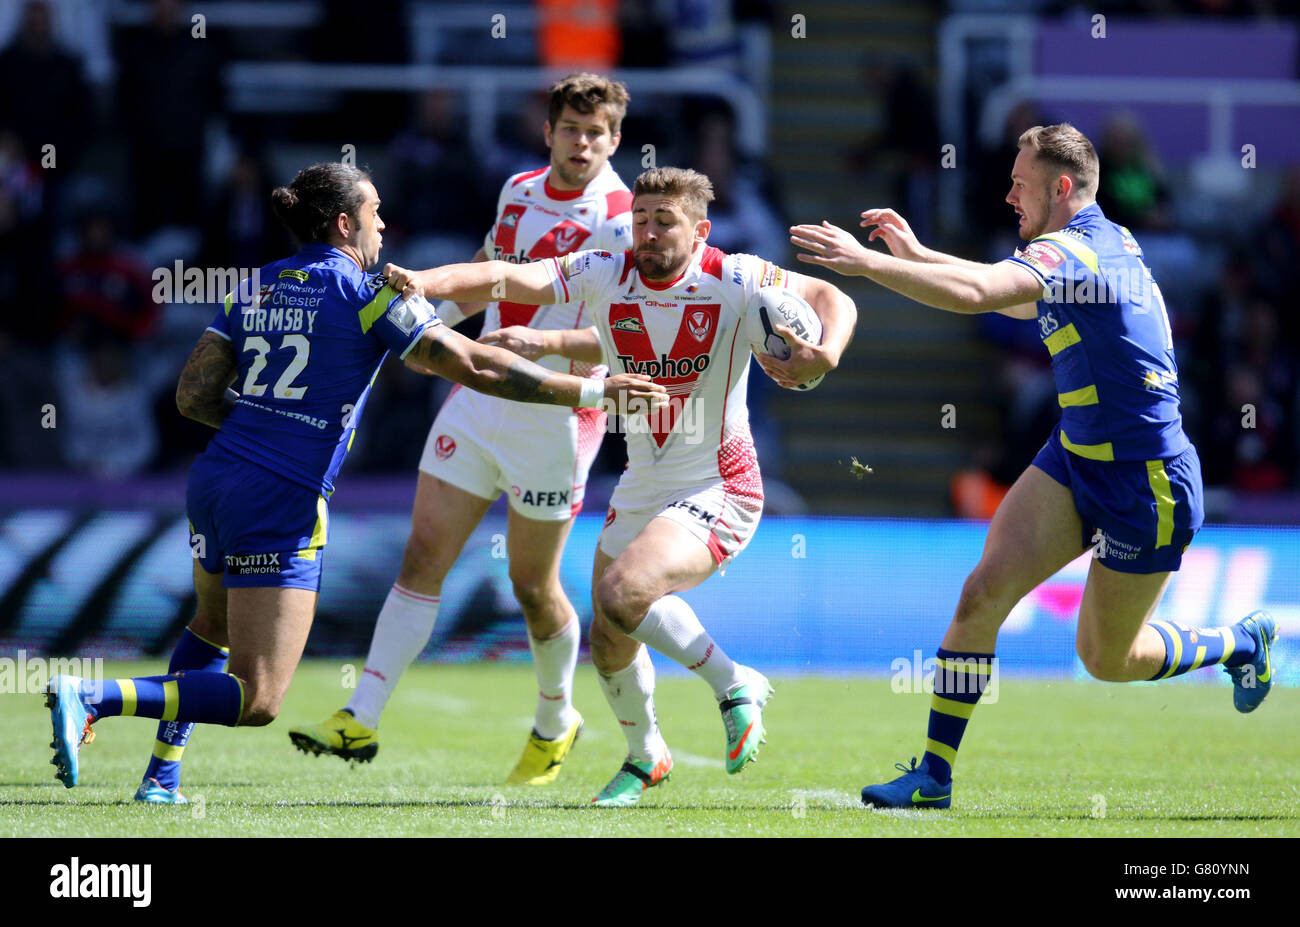 St. Helens Tom Makinson is tackled by Warrington's Gene Ormsby and Ben Currie during the Magic Weekend match at St James' Park, Newcastle. Stock Photo